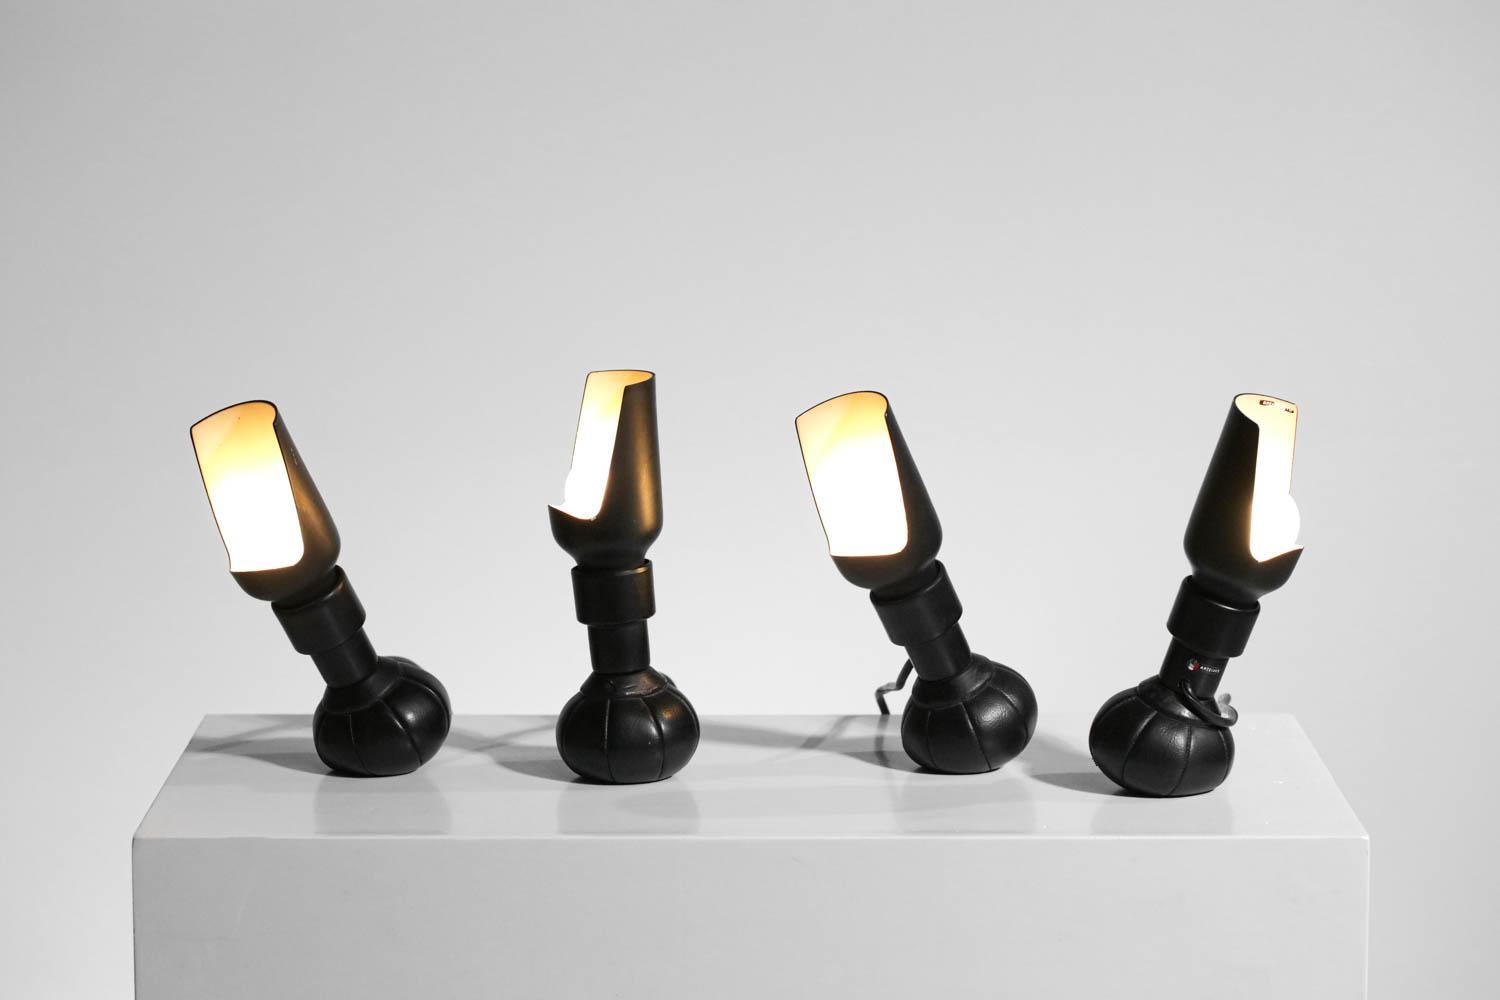 Set of 4 table lamps model 600p of the Italian designer Gino Sarfatti. Lamps published by Arteluce in the 60s. Base in leather weighted with lead that allows the lamp to be oriented in any position. lampshade in black and white lacquered metal